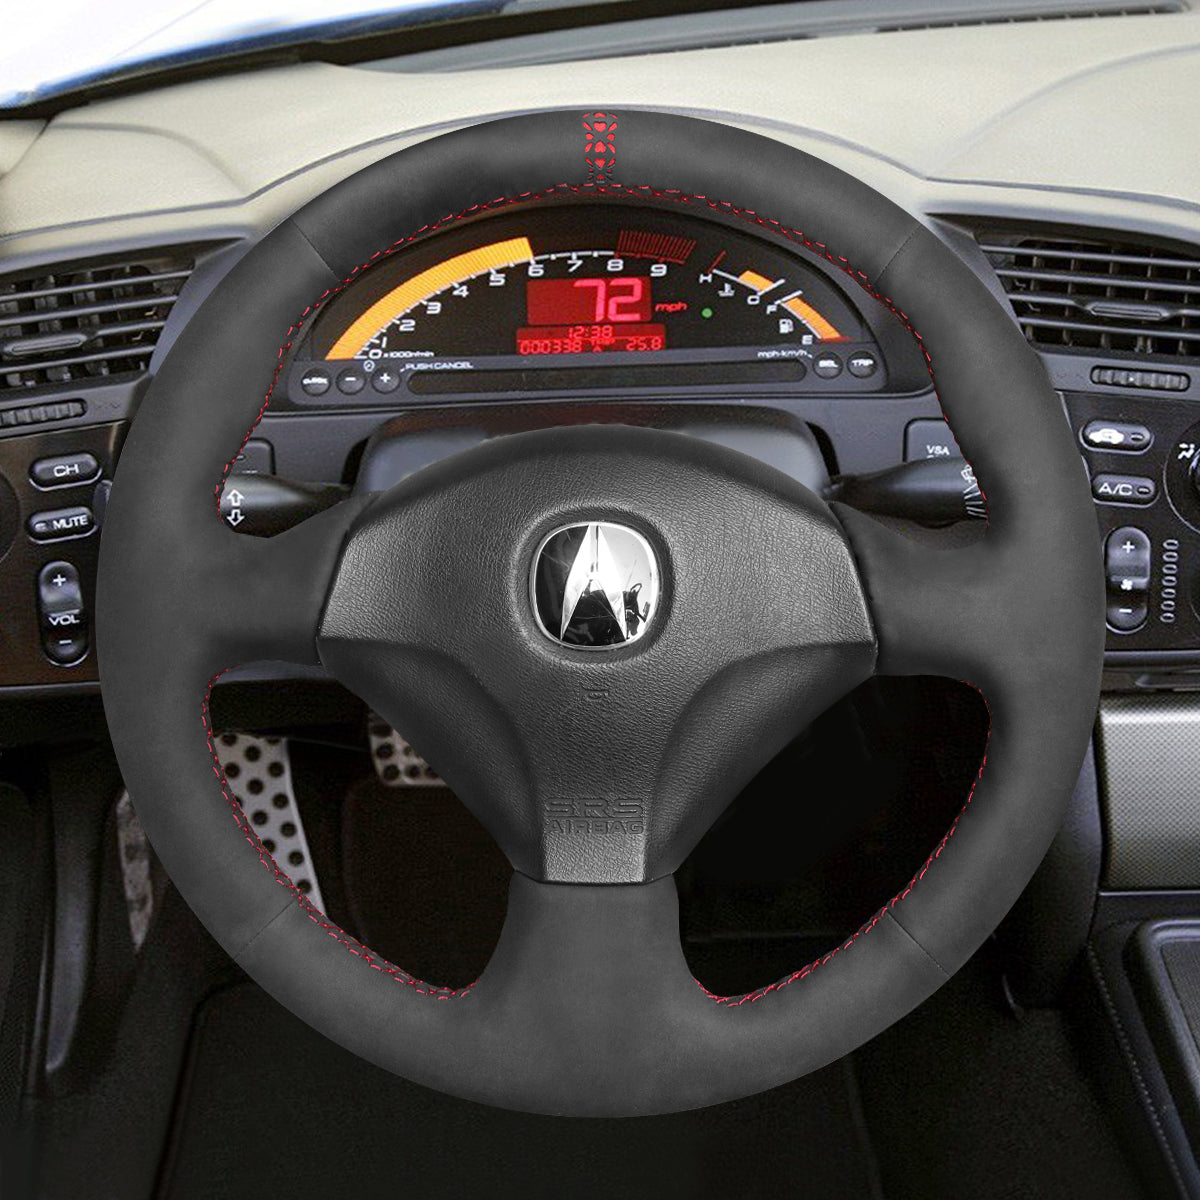 MEWANT Steering Wheel Cover for Honda S2000 2000-2009 / Civic (SI) 2002-2005 / Insight 2000-2006 / for Acura RSX 2002-2006